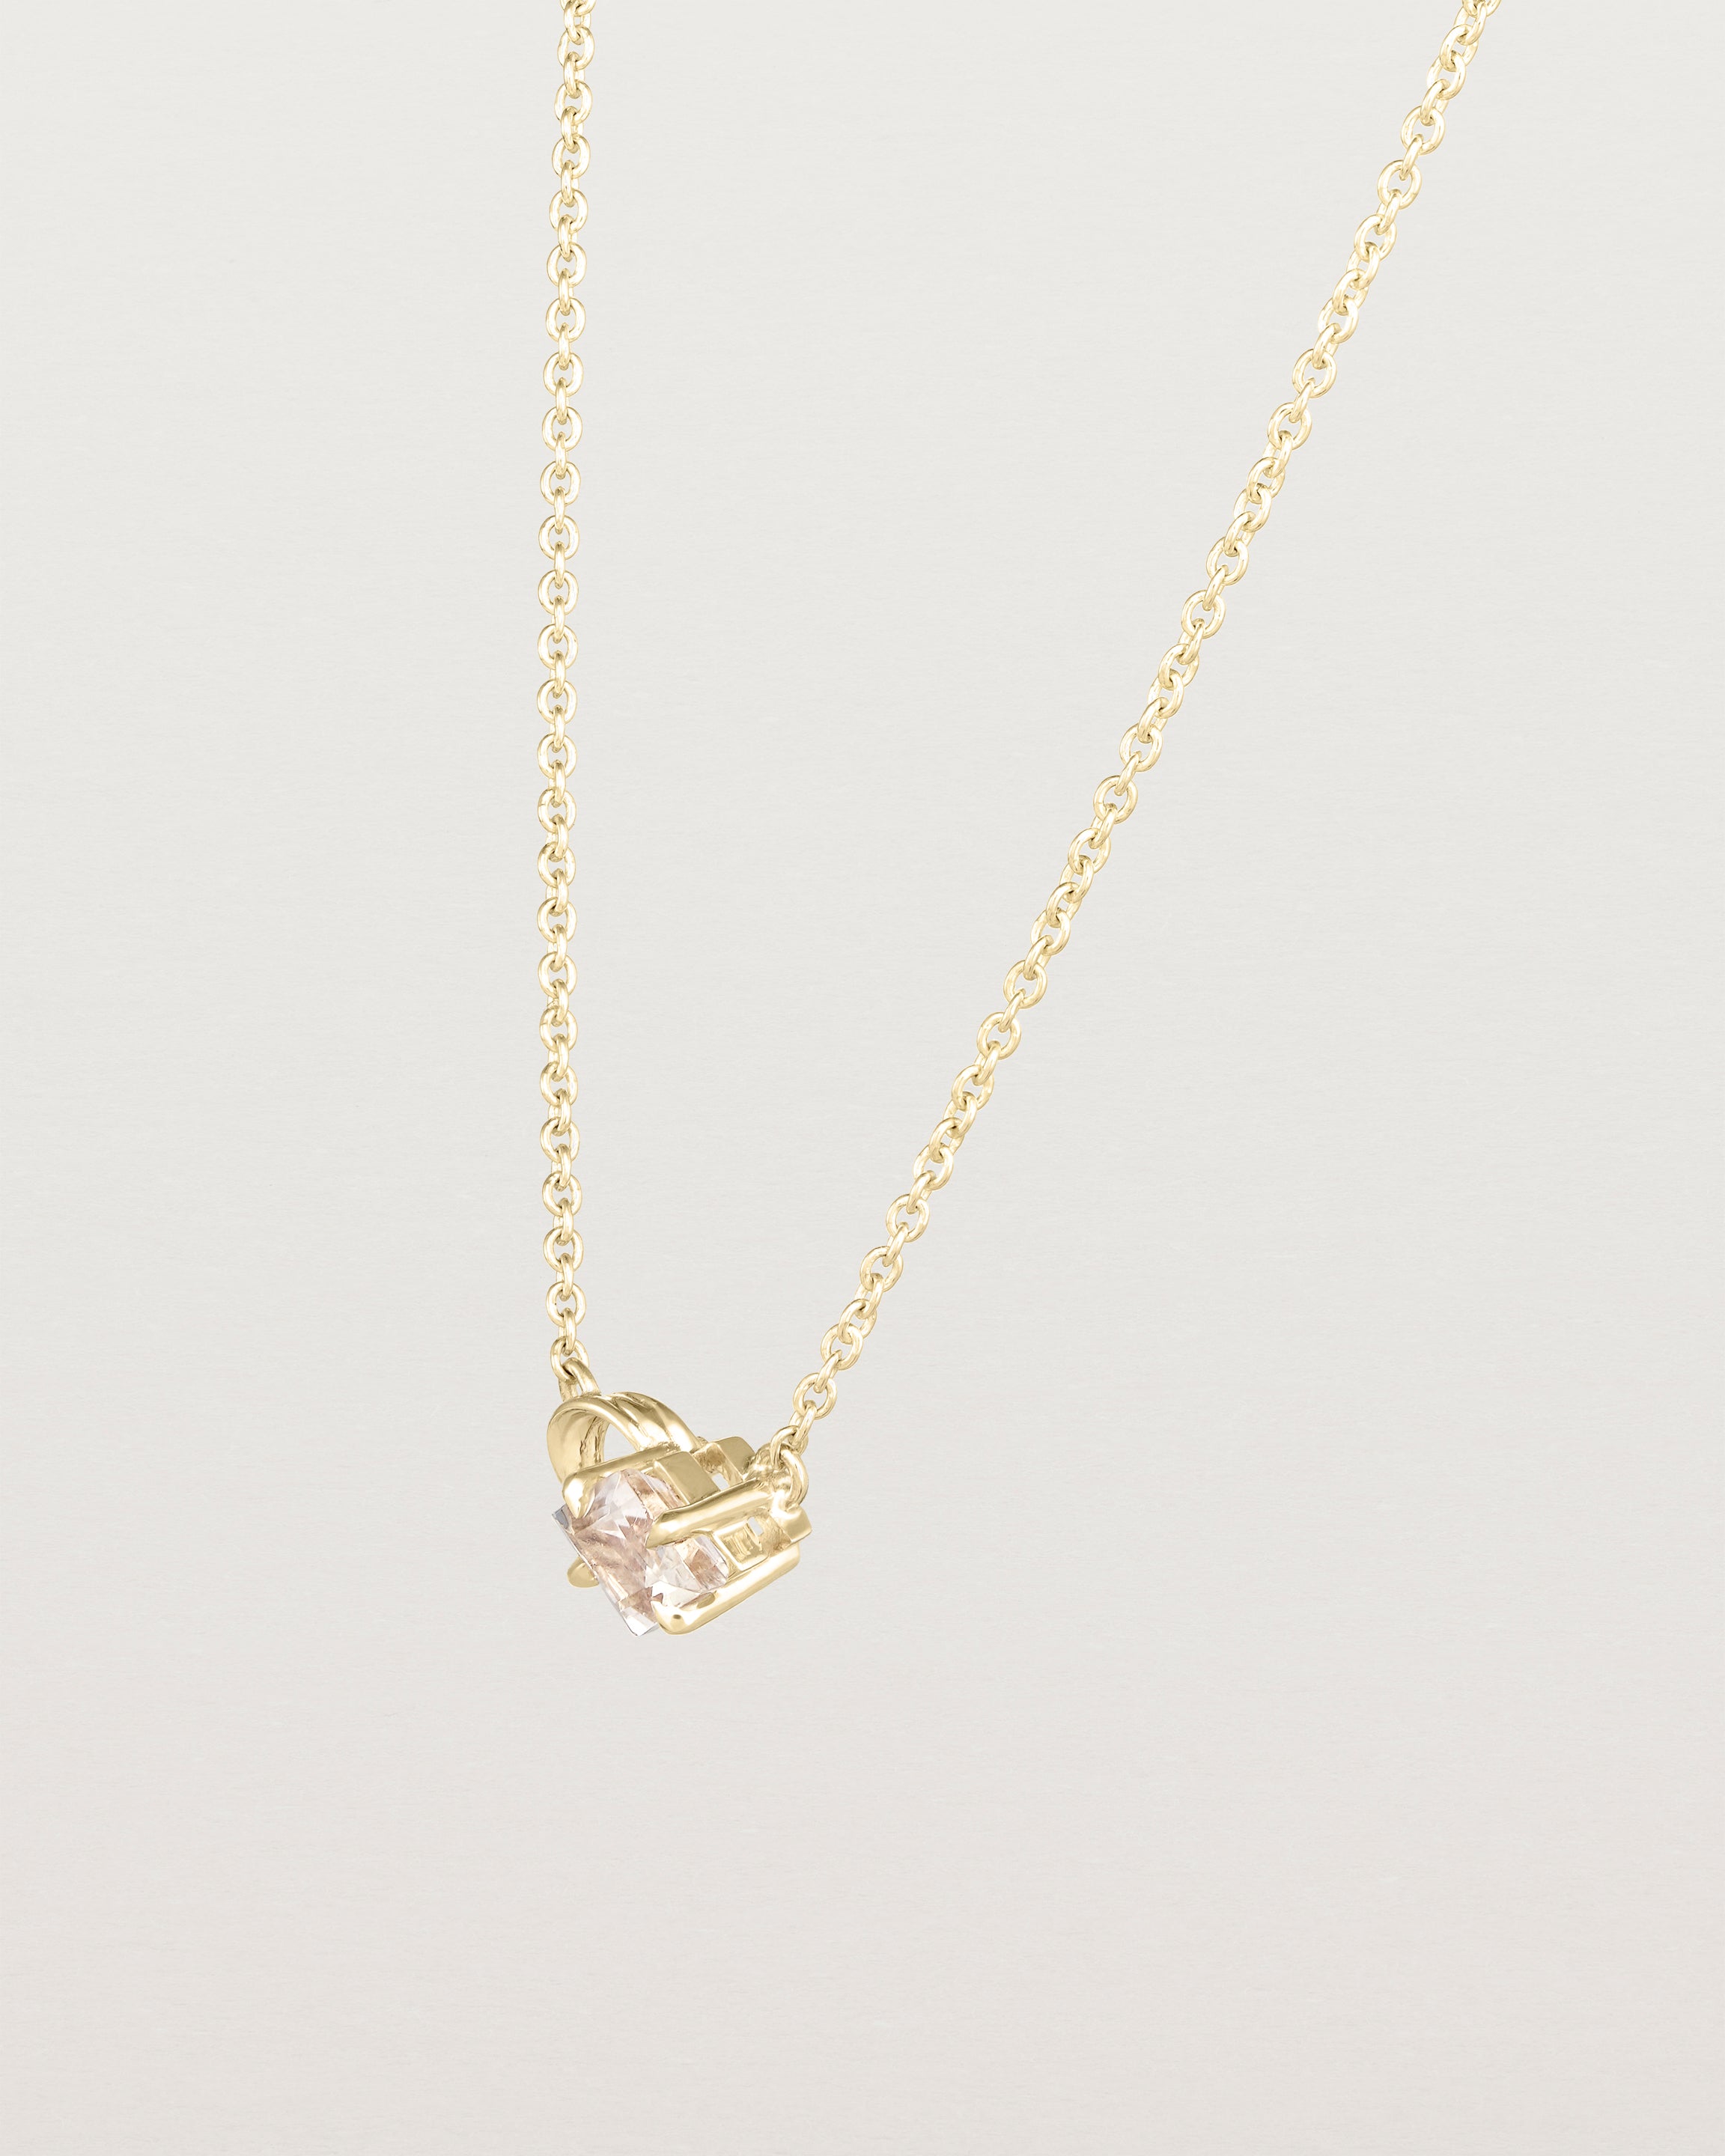 Angled view of the Nuna Necklace | Savannah Sunstone in yellow gold.